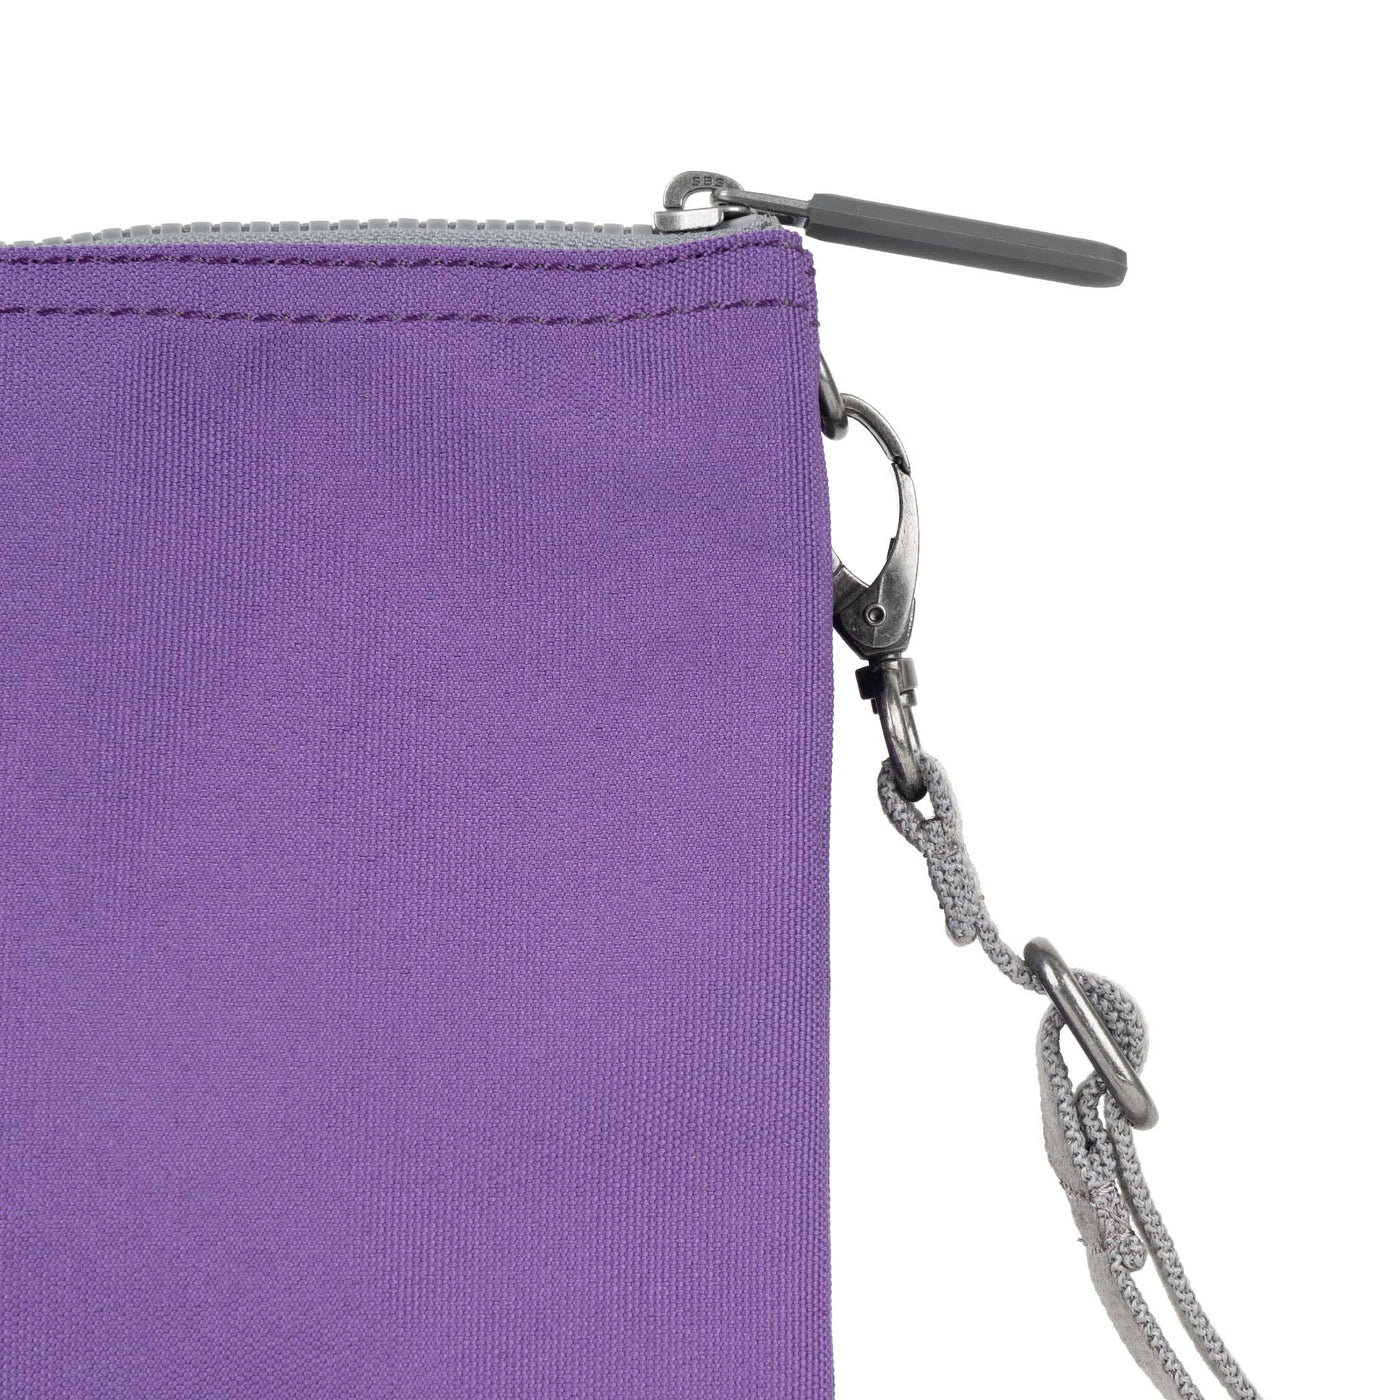 Carnaby Crossbody XL Imperial Purple Recycled Canvas